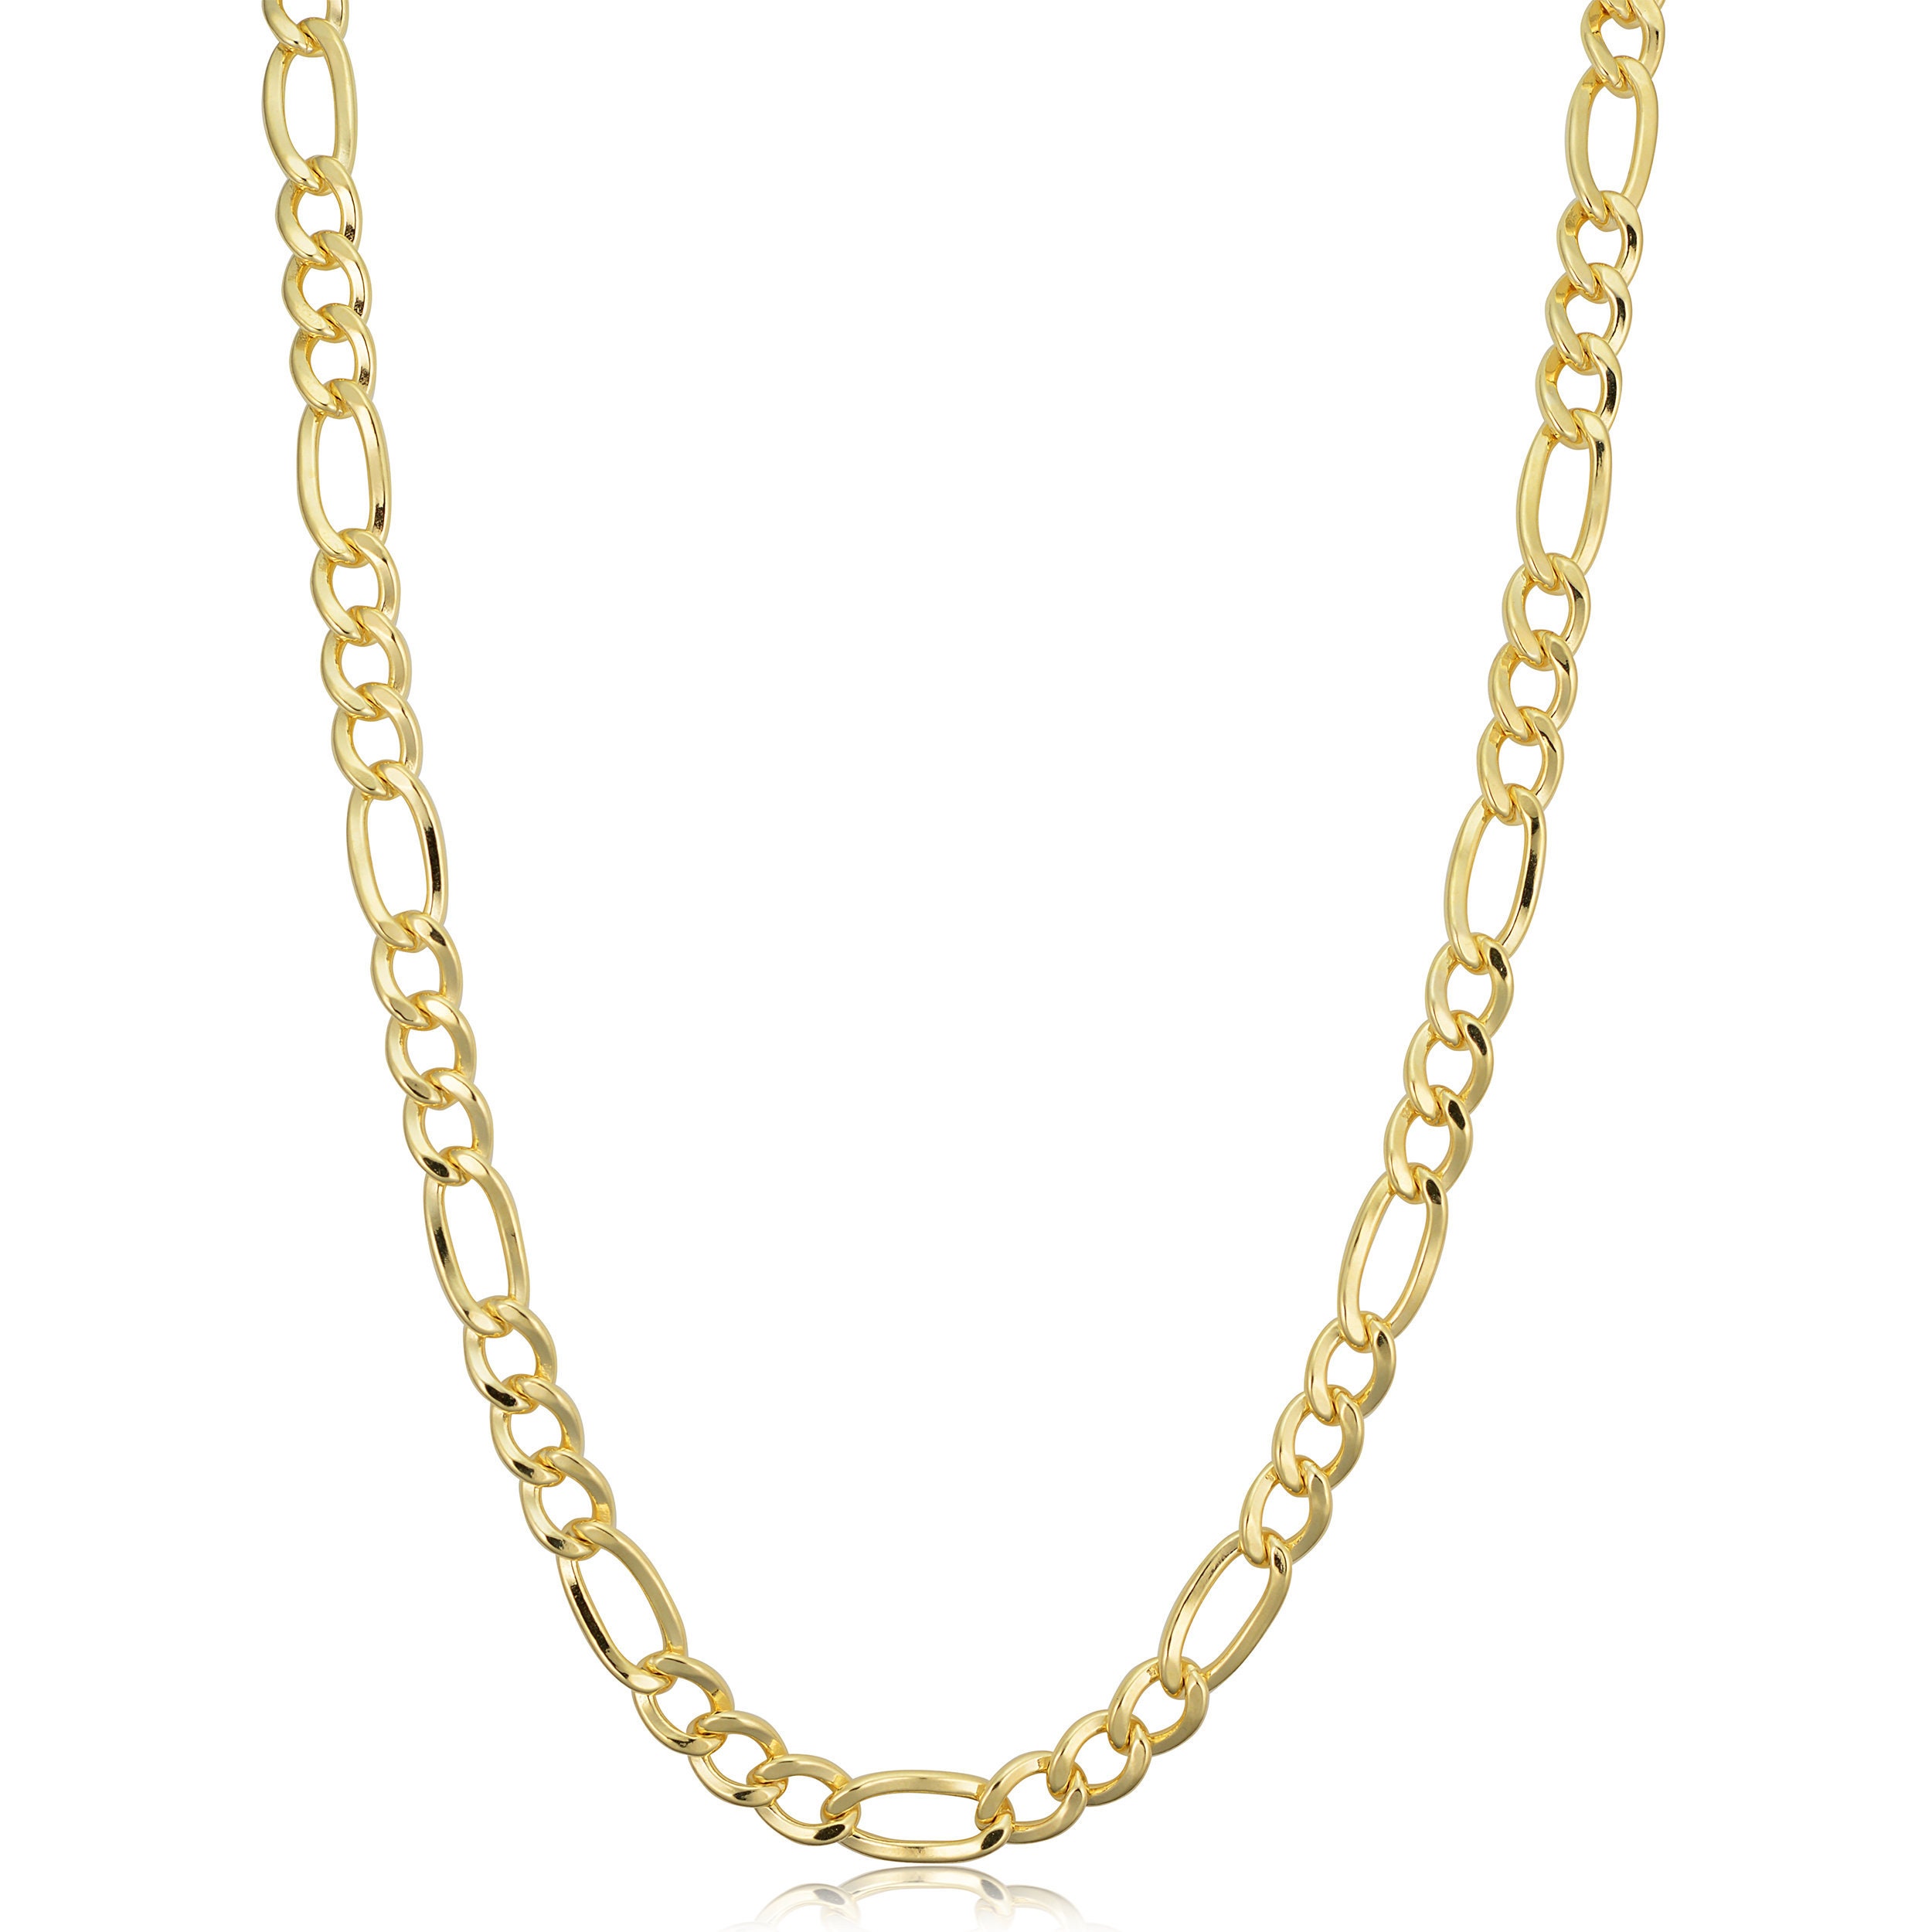 Gold Chain for Men and Women 14K Gold Filled Figaro Chain - Etsy